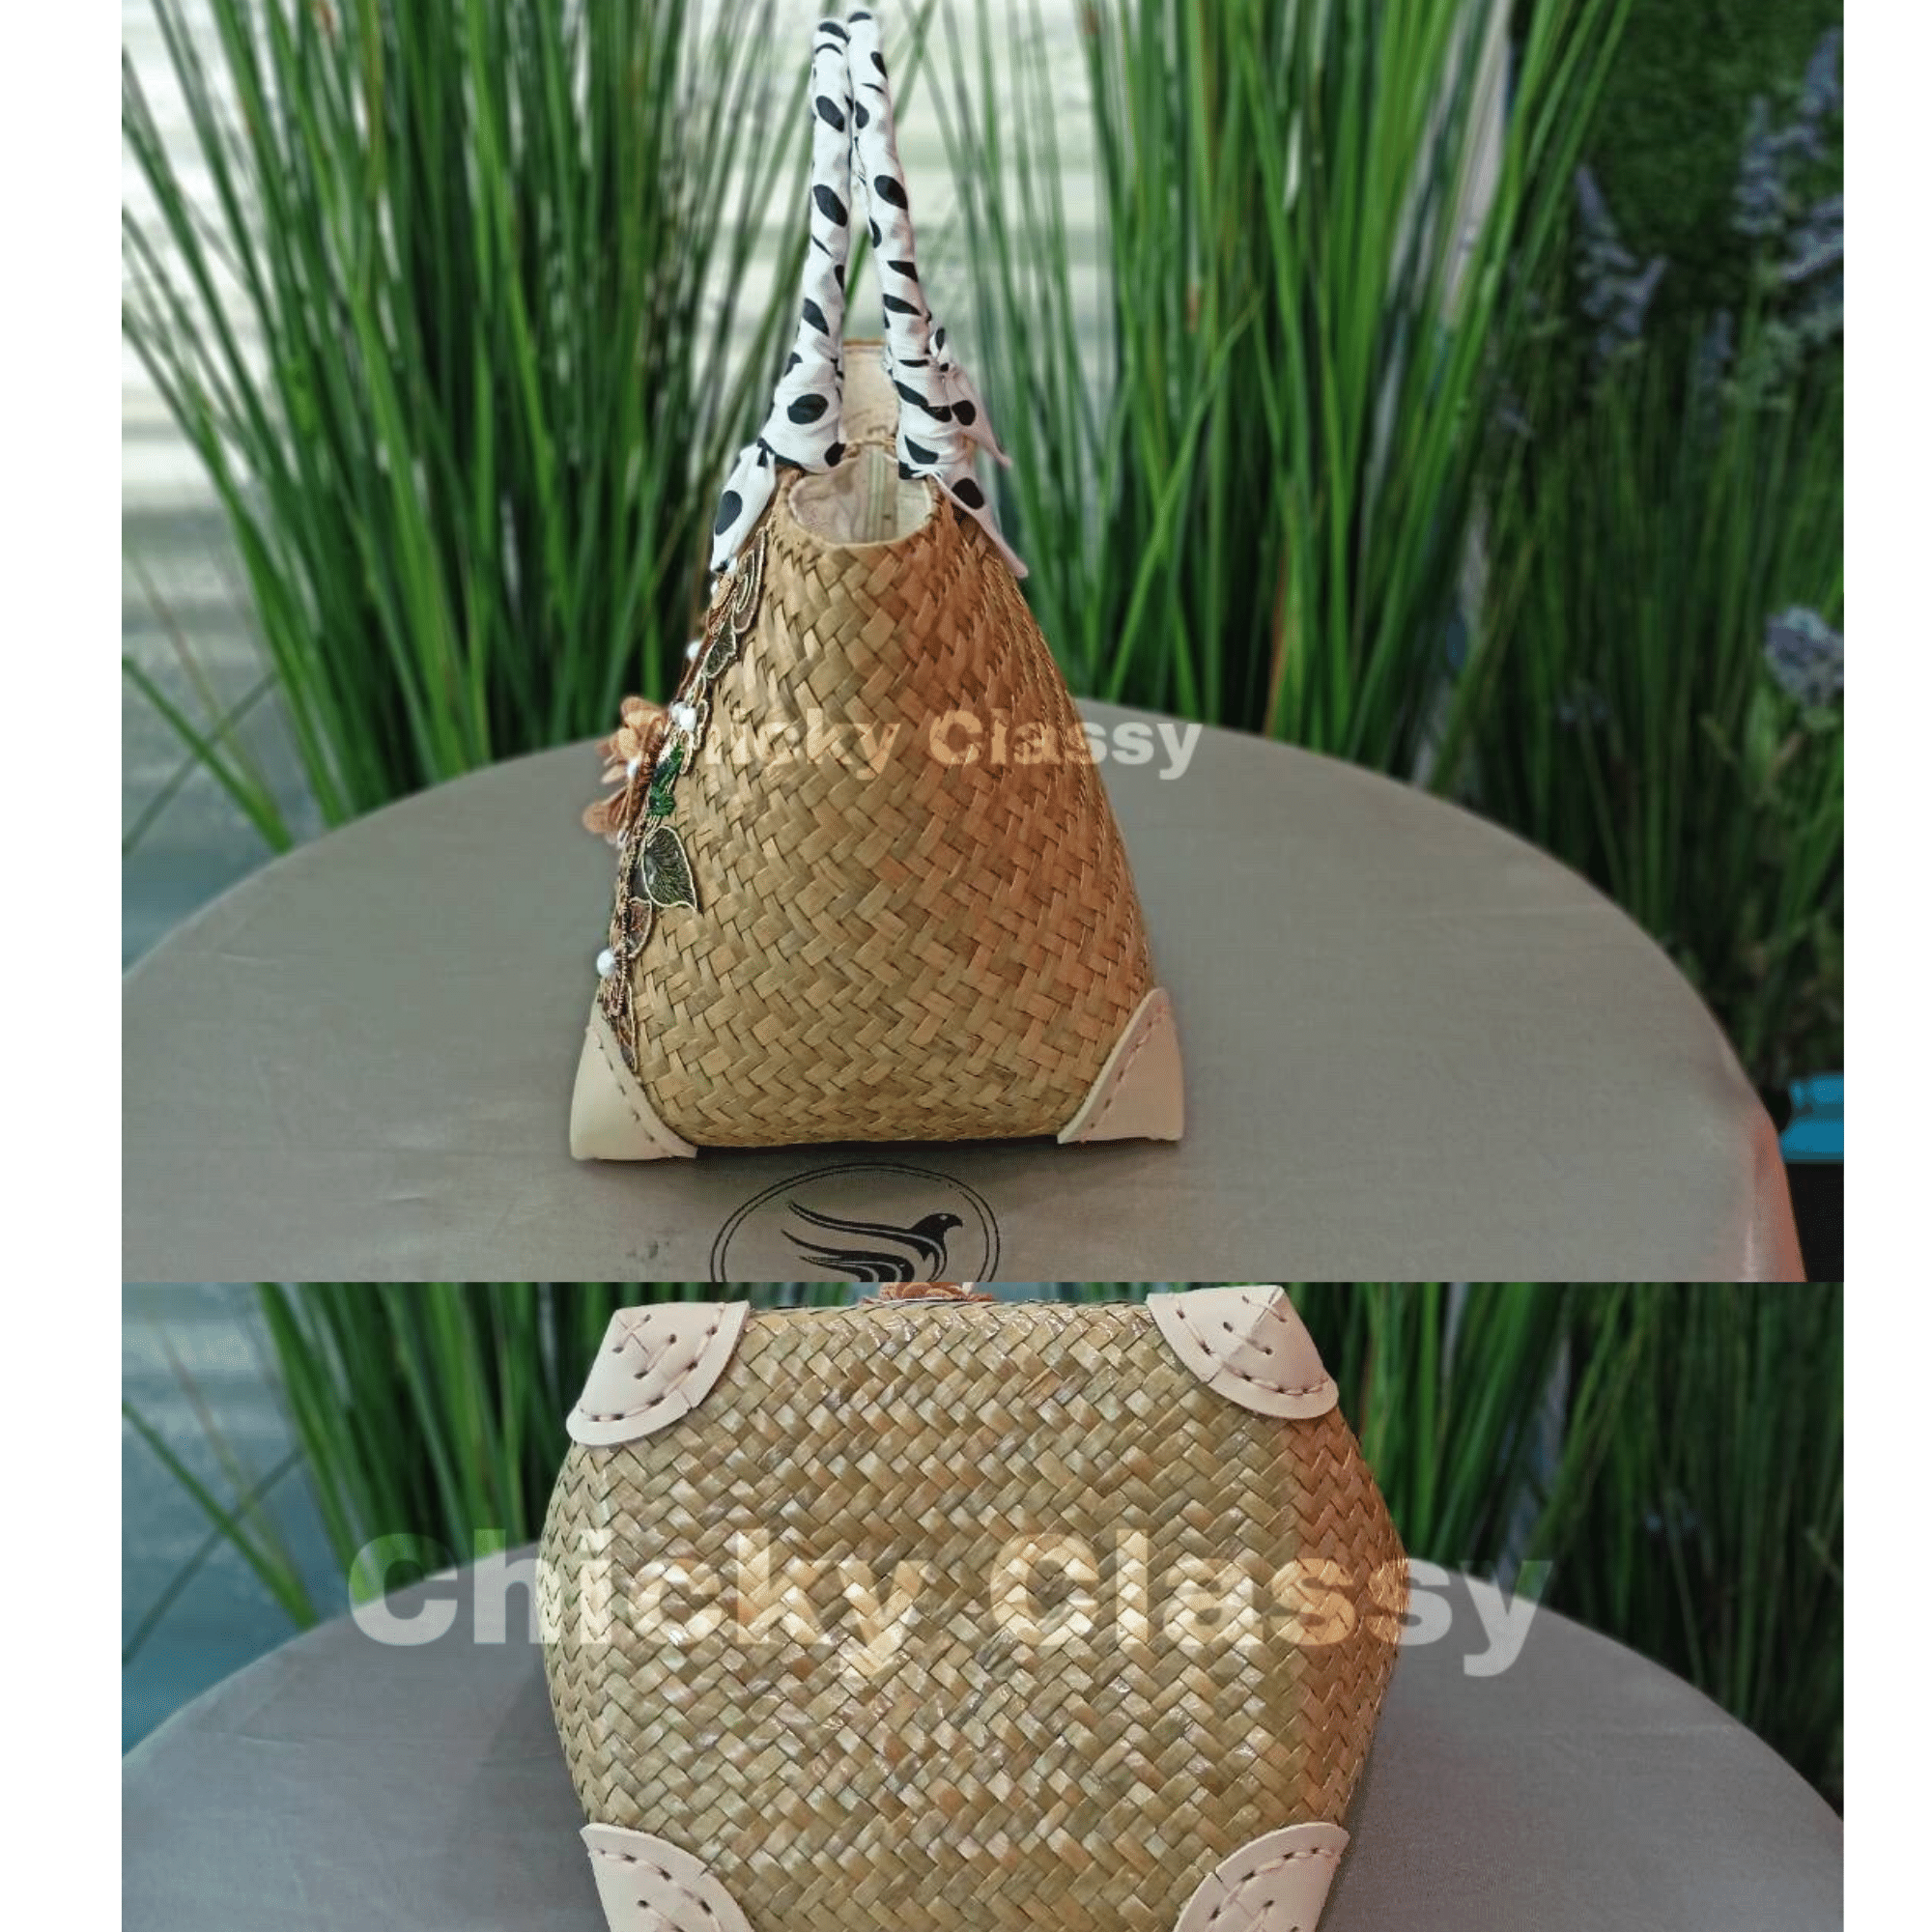 Chicky classy medium size straw hand bag. Think about me